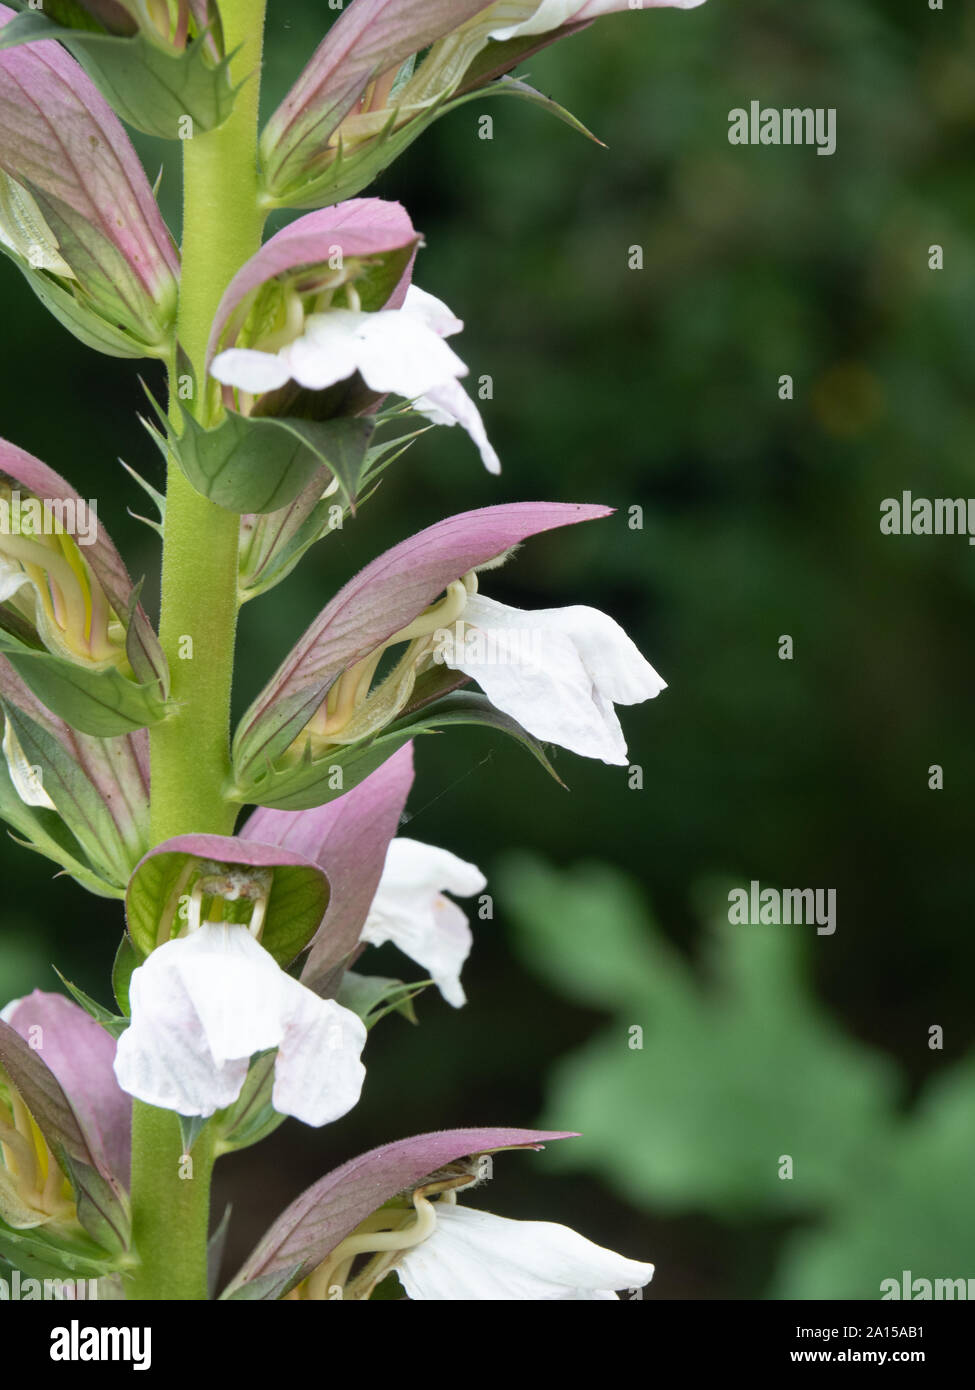 A close up of a group of florets of Acanthus Mollis Stock Photo